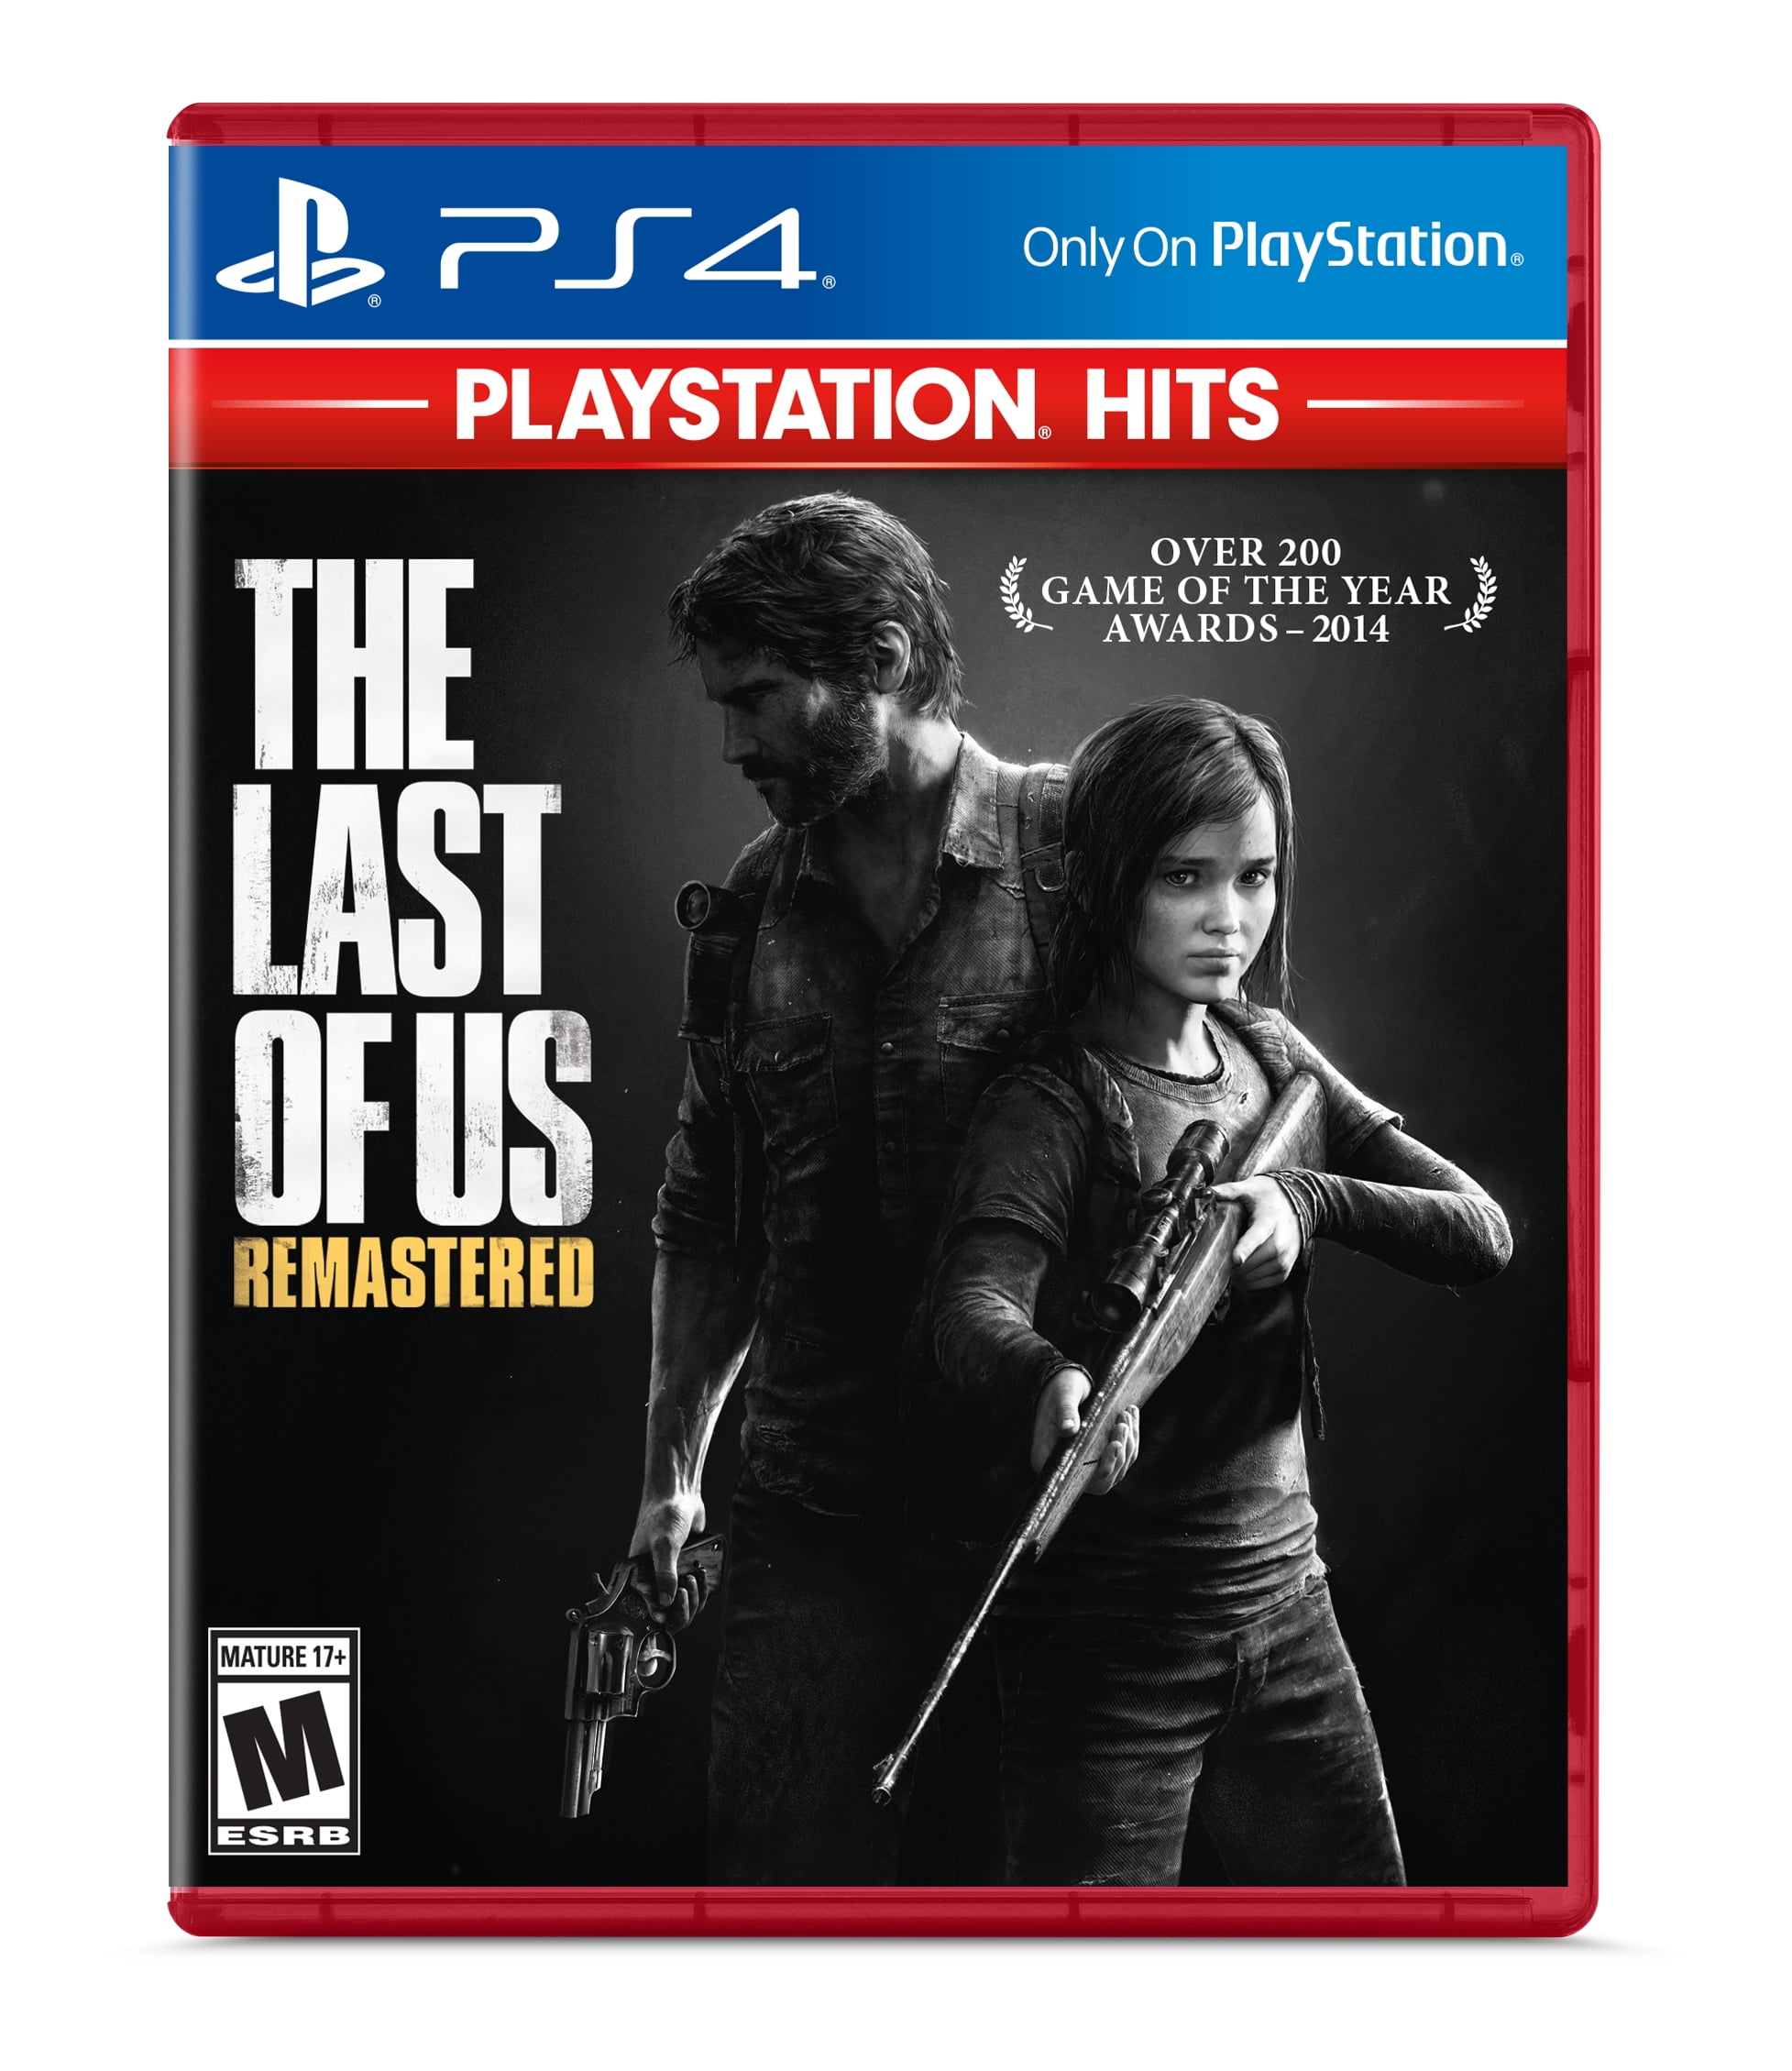 The Last of Us: Remastered - PlayStation Hits, Sony, PlayStation 4, 711719522911